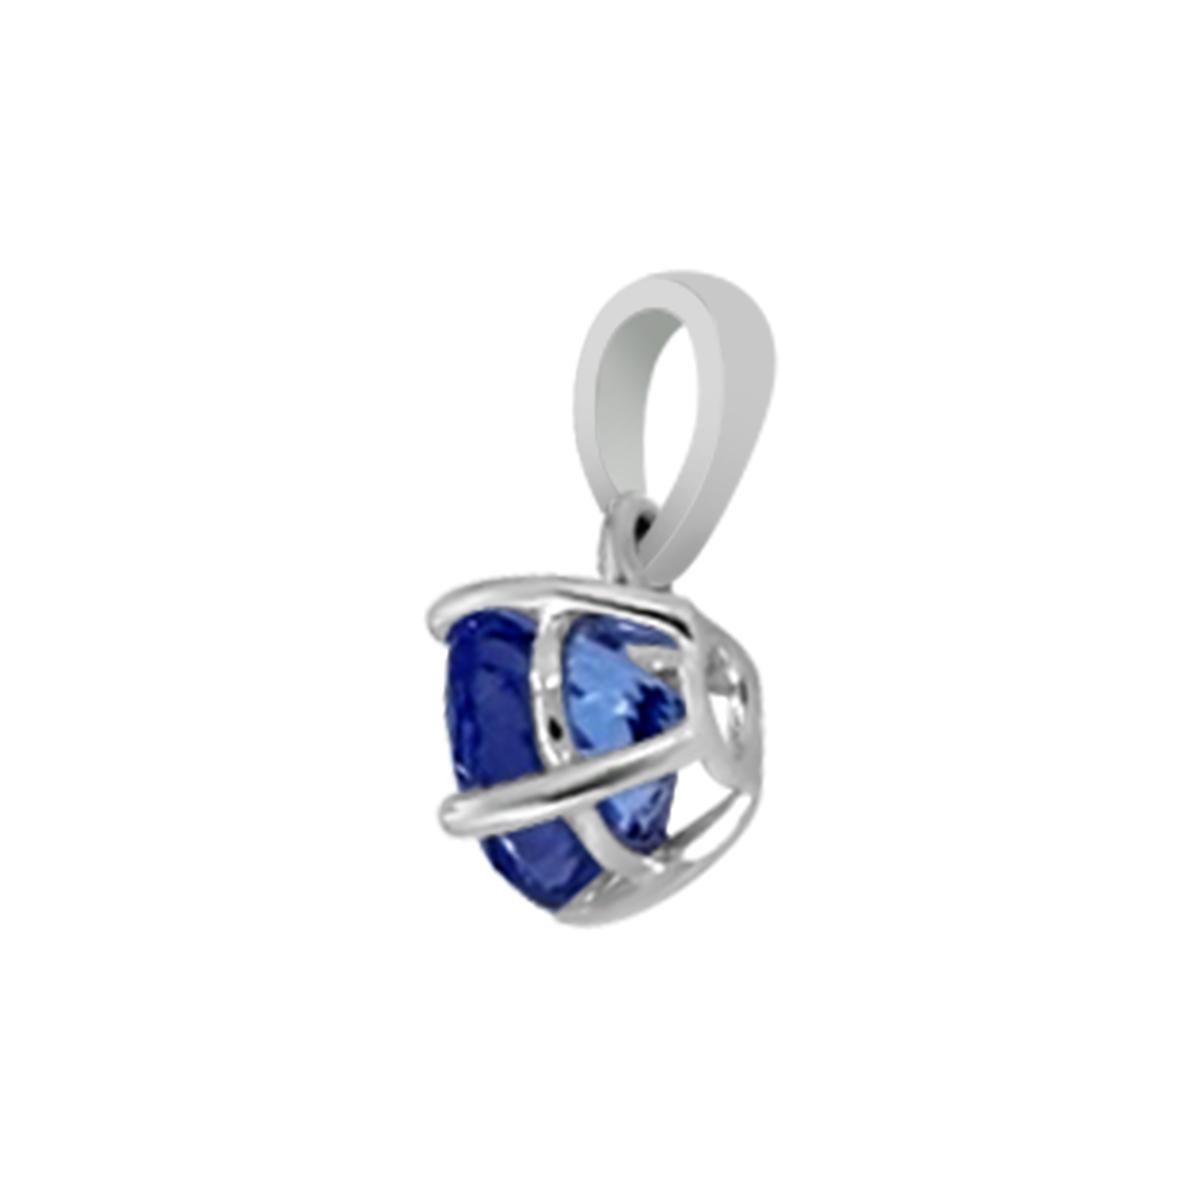 This Breathtaking Pendant For Women Features A Beautiful 5mm Round Shaped Genuine Blue Tanzanite, 
 The Beautiful Big Gemstone Is Set In Four Prong 14K White Gold For Complete Look.
This Pendant Will Impress Everyone Around You And Can Be Worn At